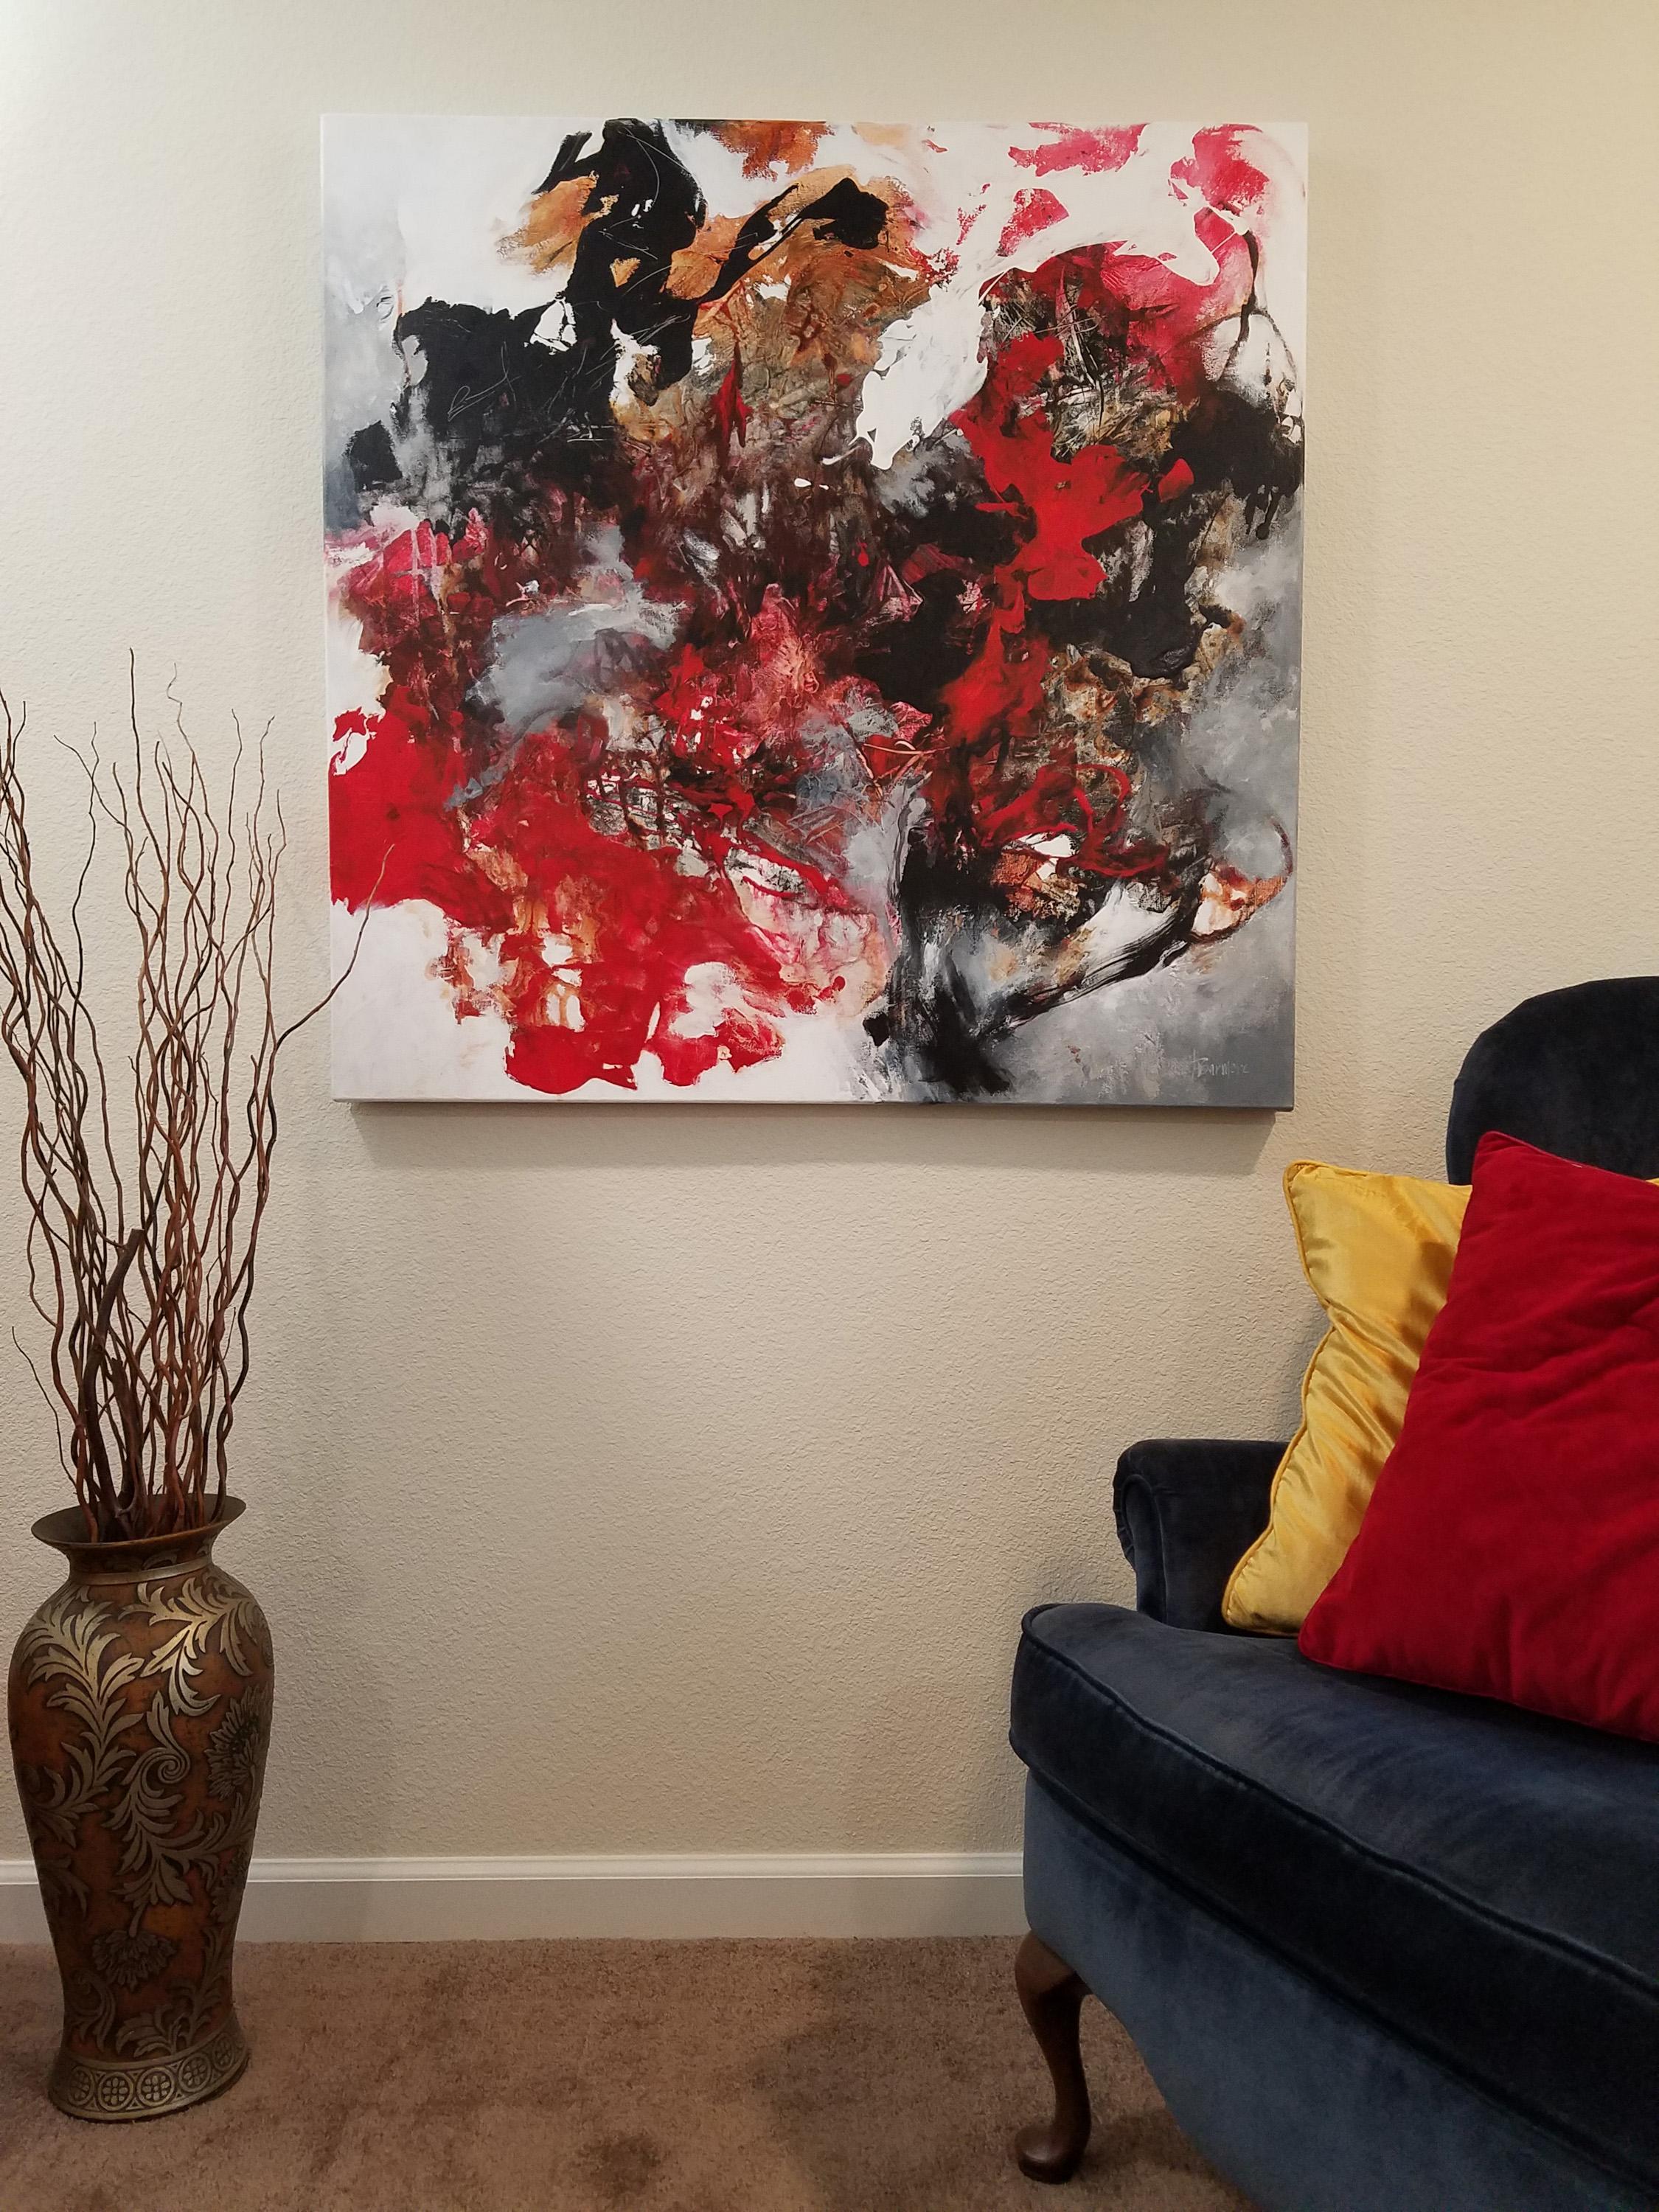 How to Grow a Diamond - Powerful Gestural Abstract Painting, Red + Black + White 2